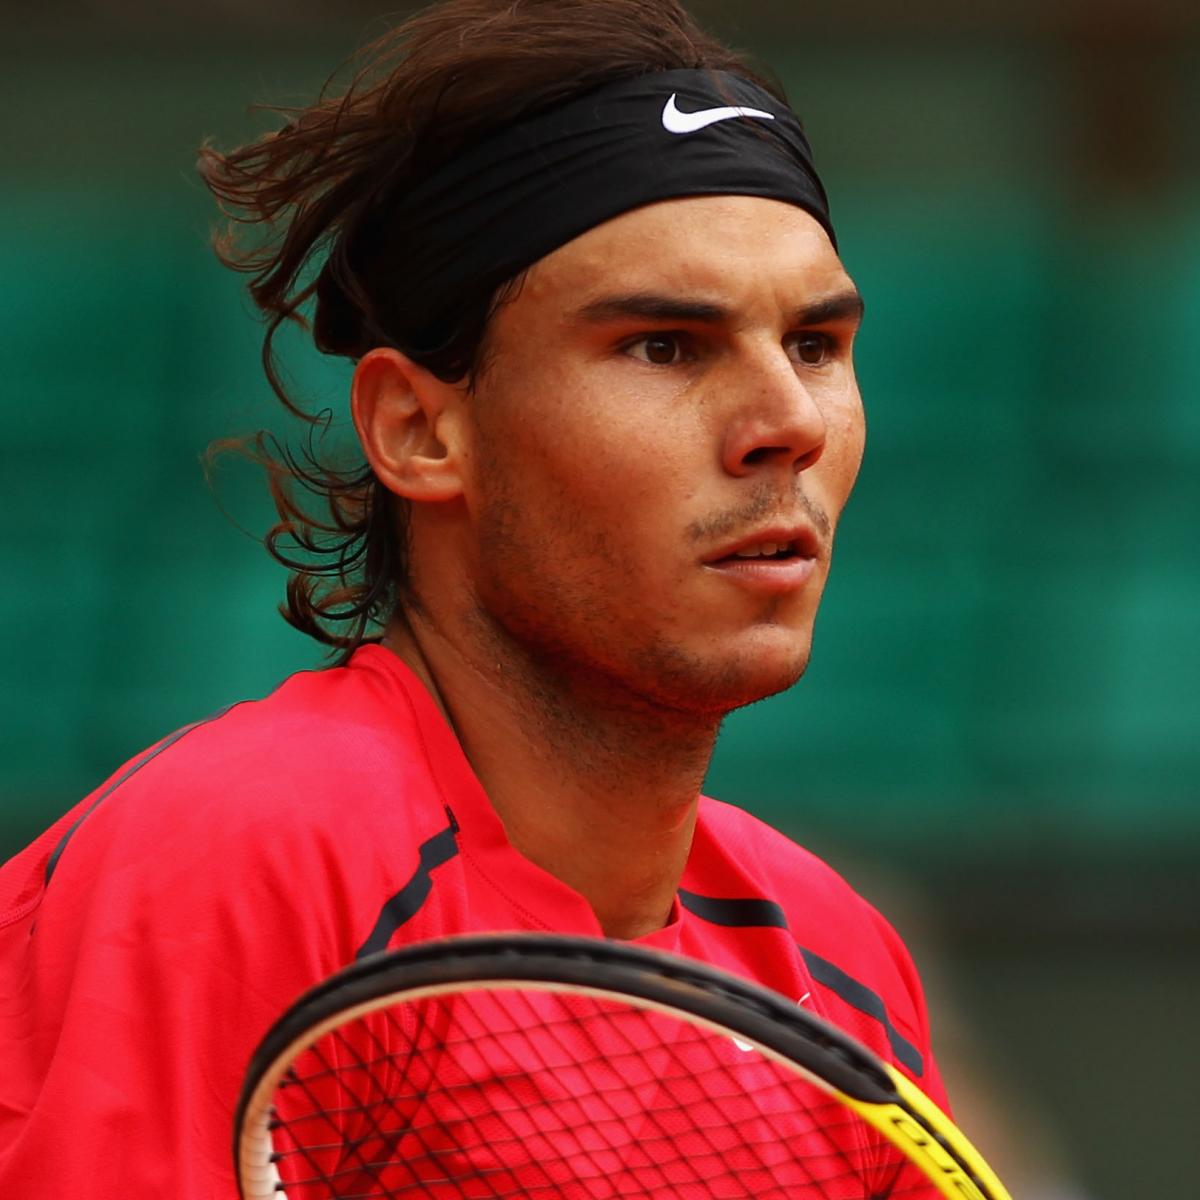 French Open 2012 Men's Final: Rafael Nadal Will Roll to an Easy Win